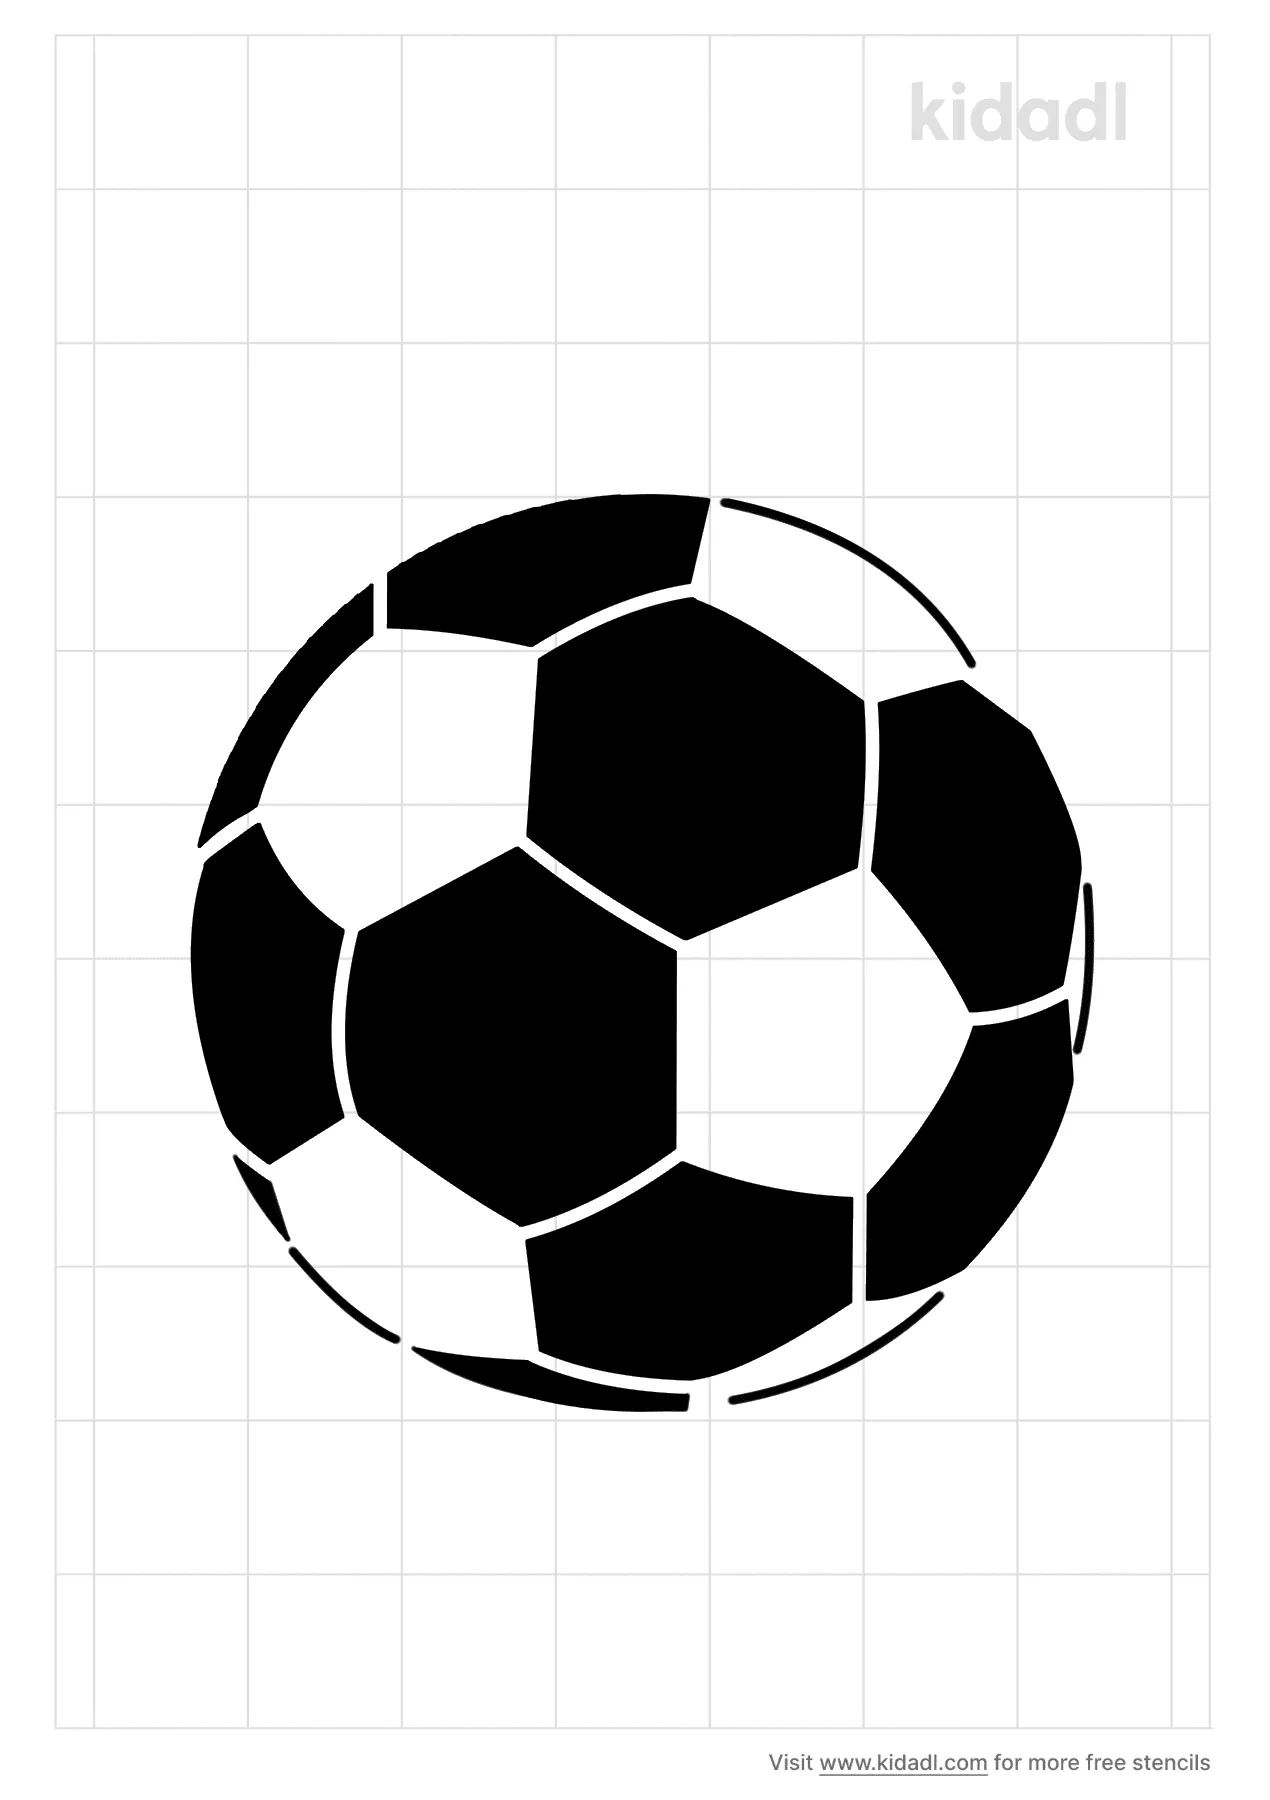 Soccer Ball Stencil Template For Walls And Crafts Reusable Stencils For